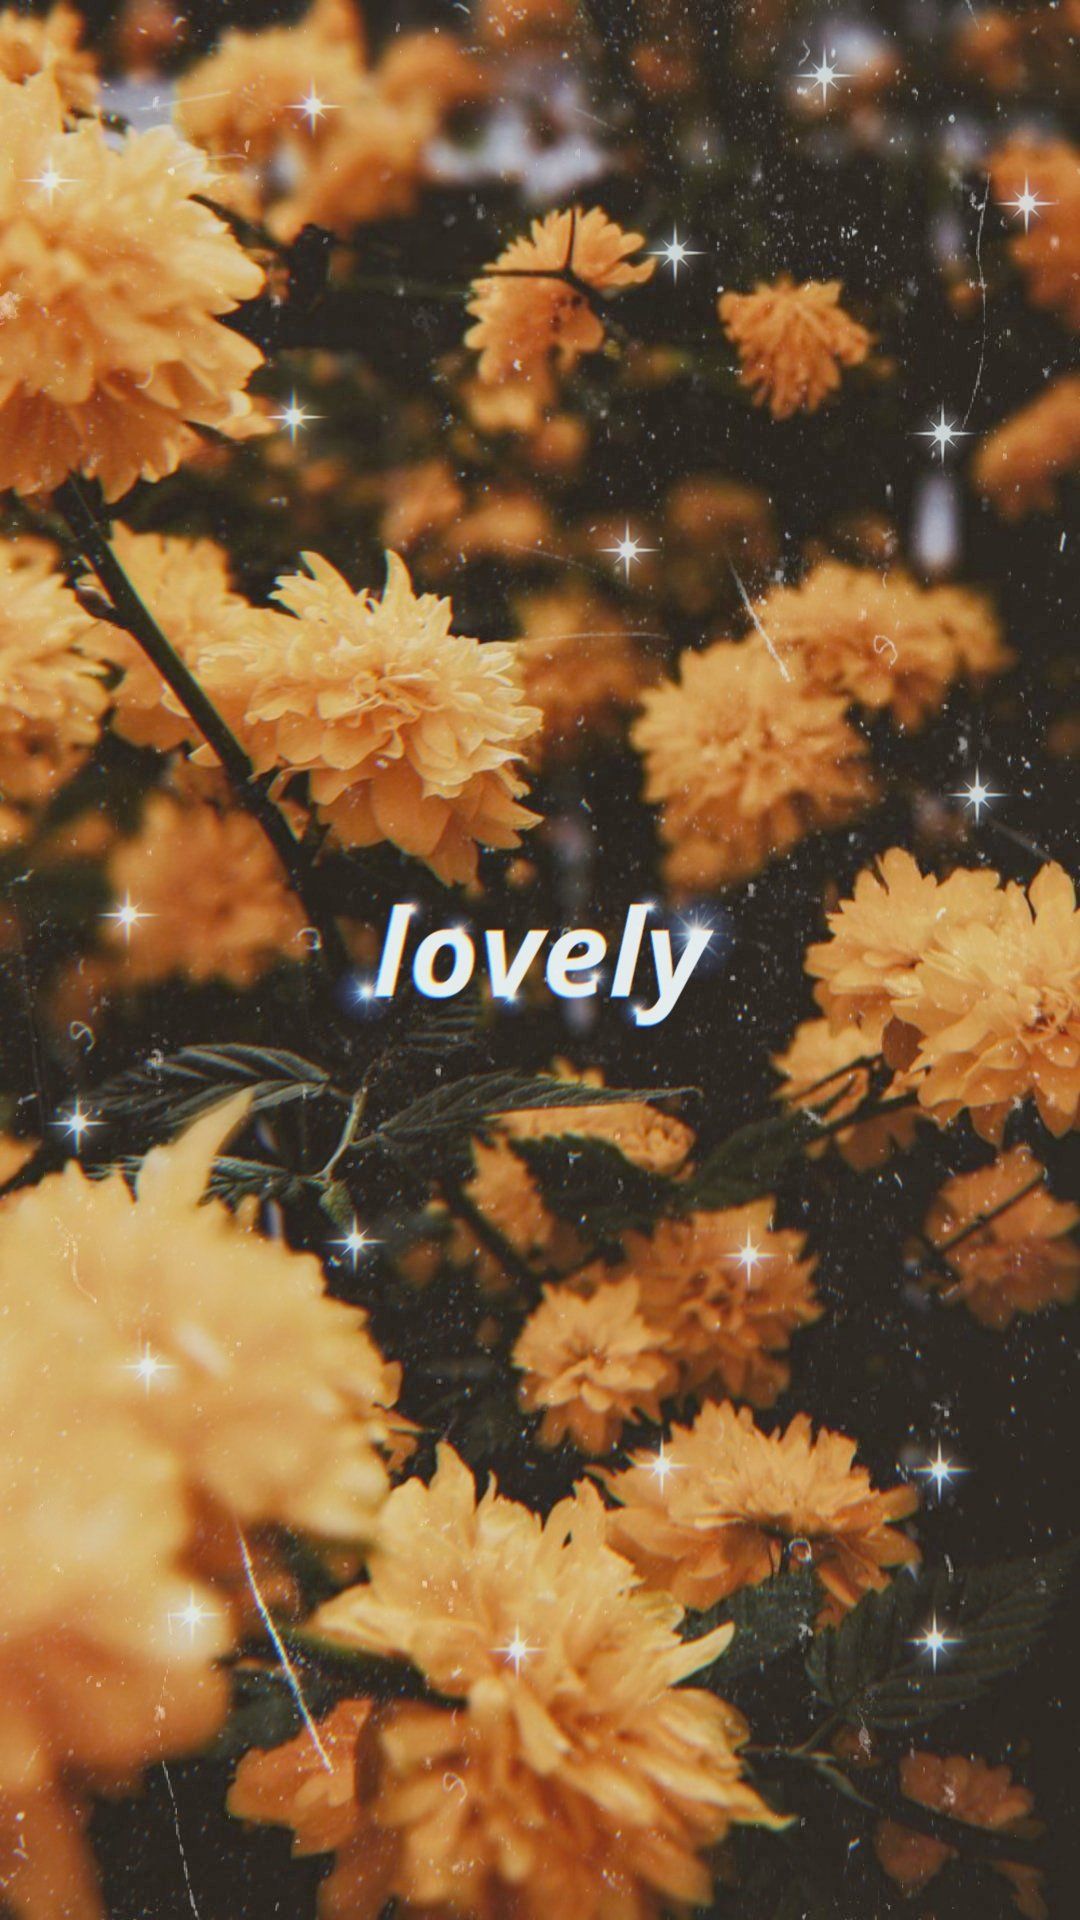 Aesthetic phone background of yellow flowers with the word 